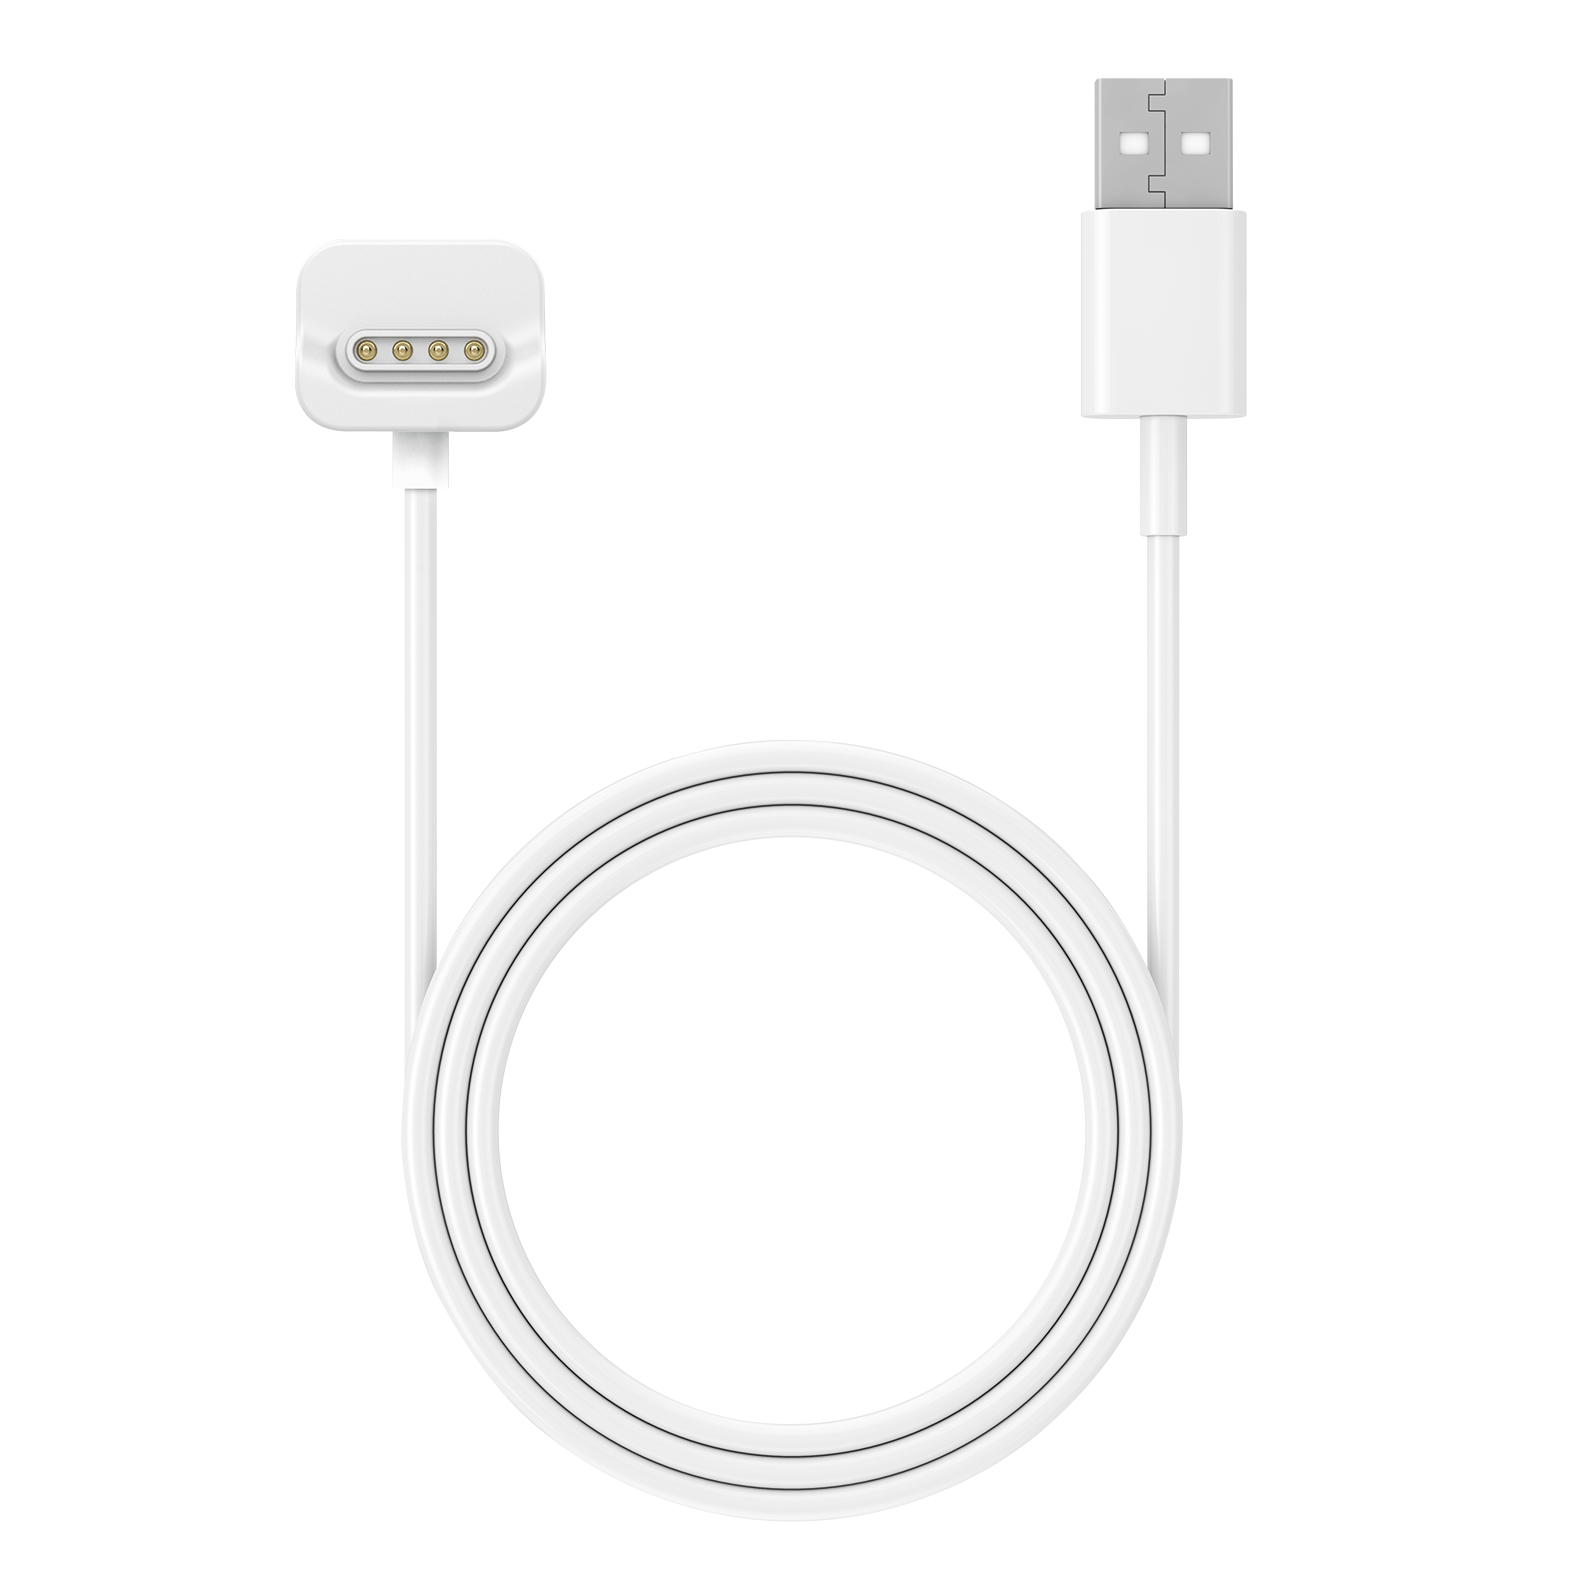 Charging Cable for myFirst Fone R2 - OAXIS Asia Pte Ltd